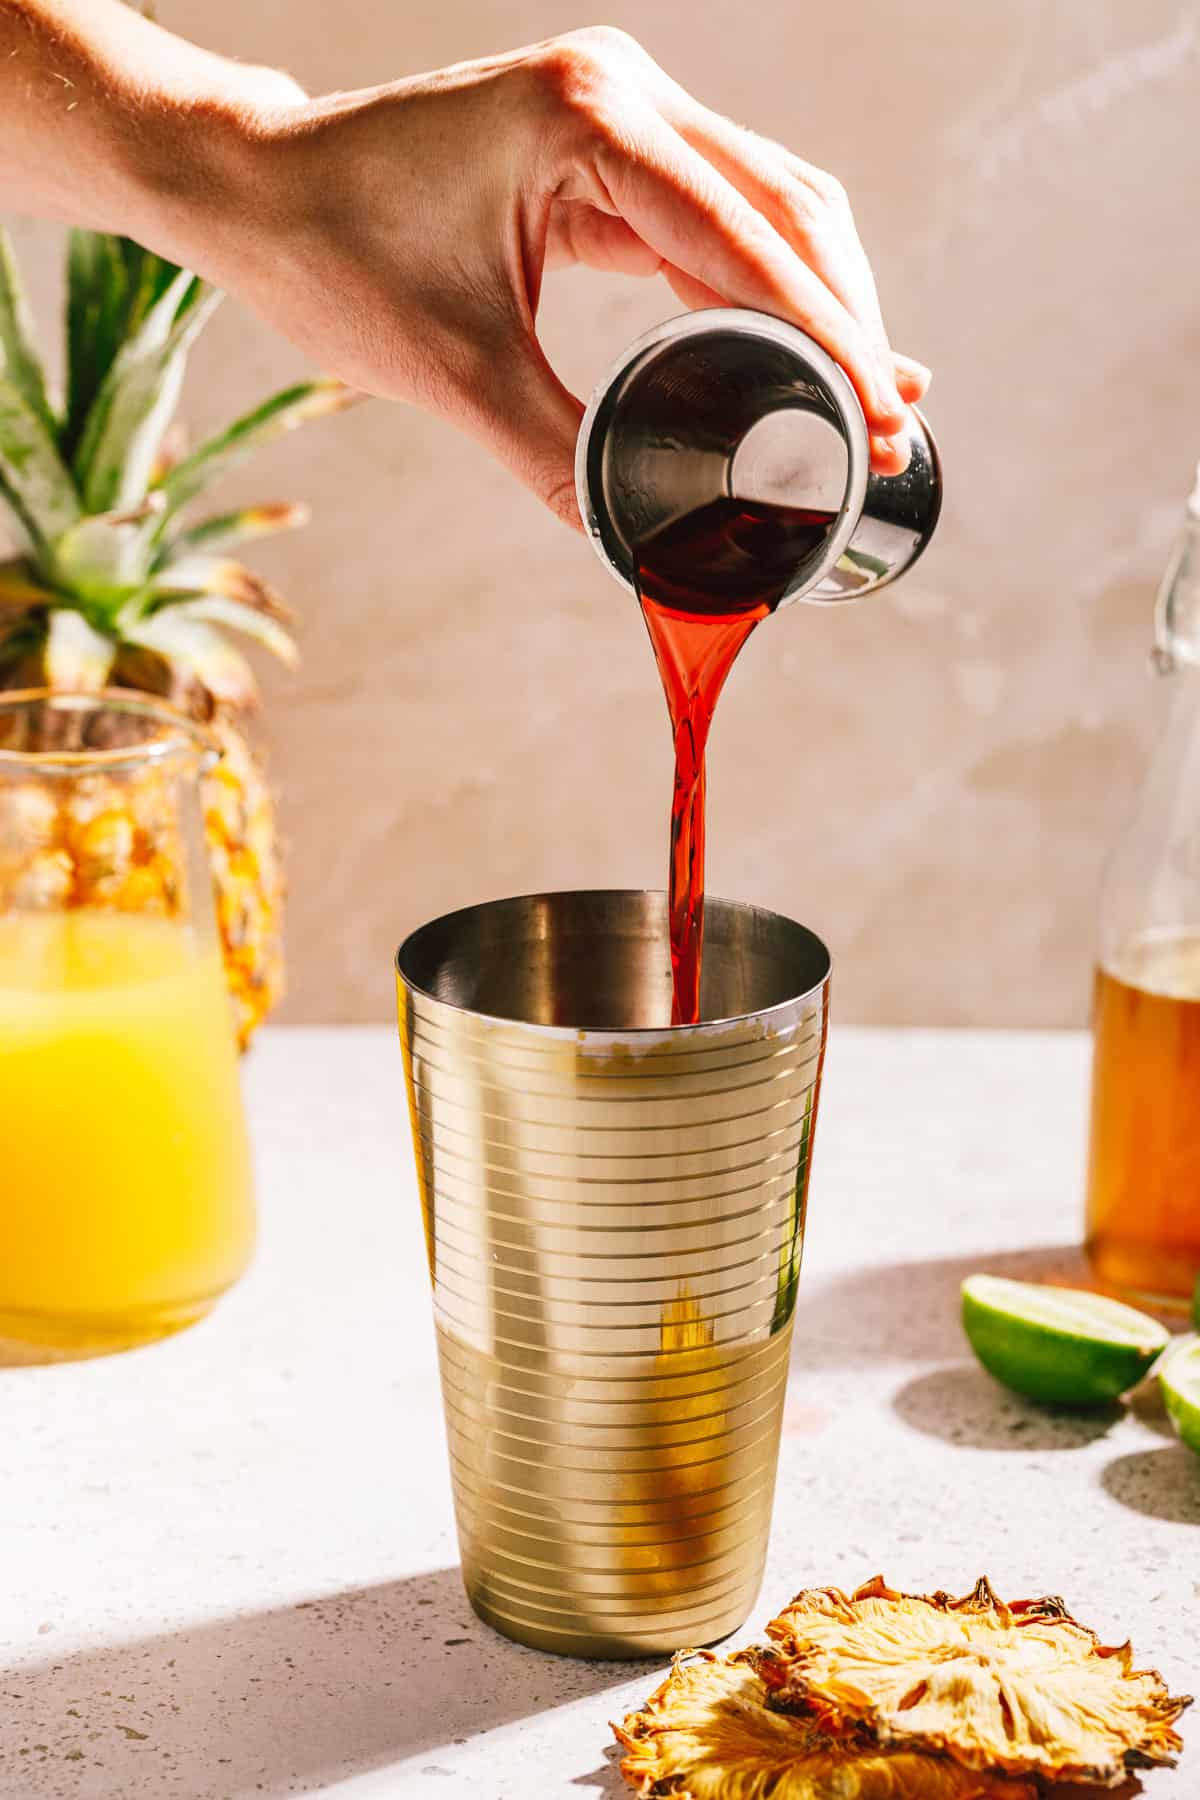 Campari being poured into a cocktail shaker with a pineapple, limes and juices around it.